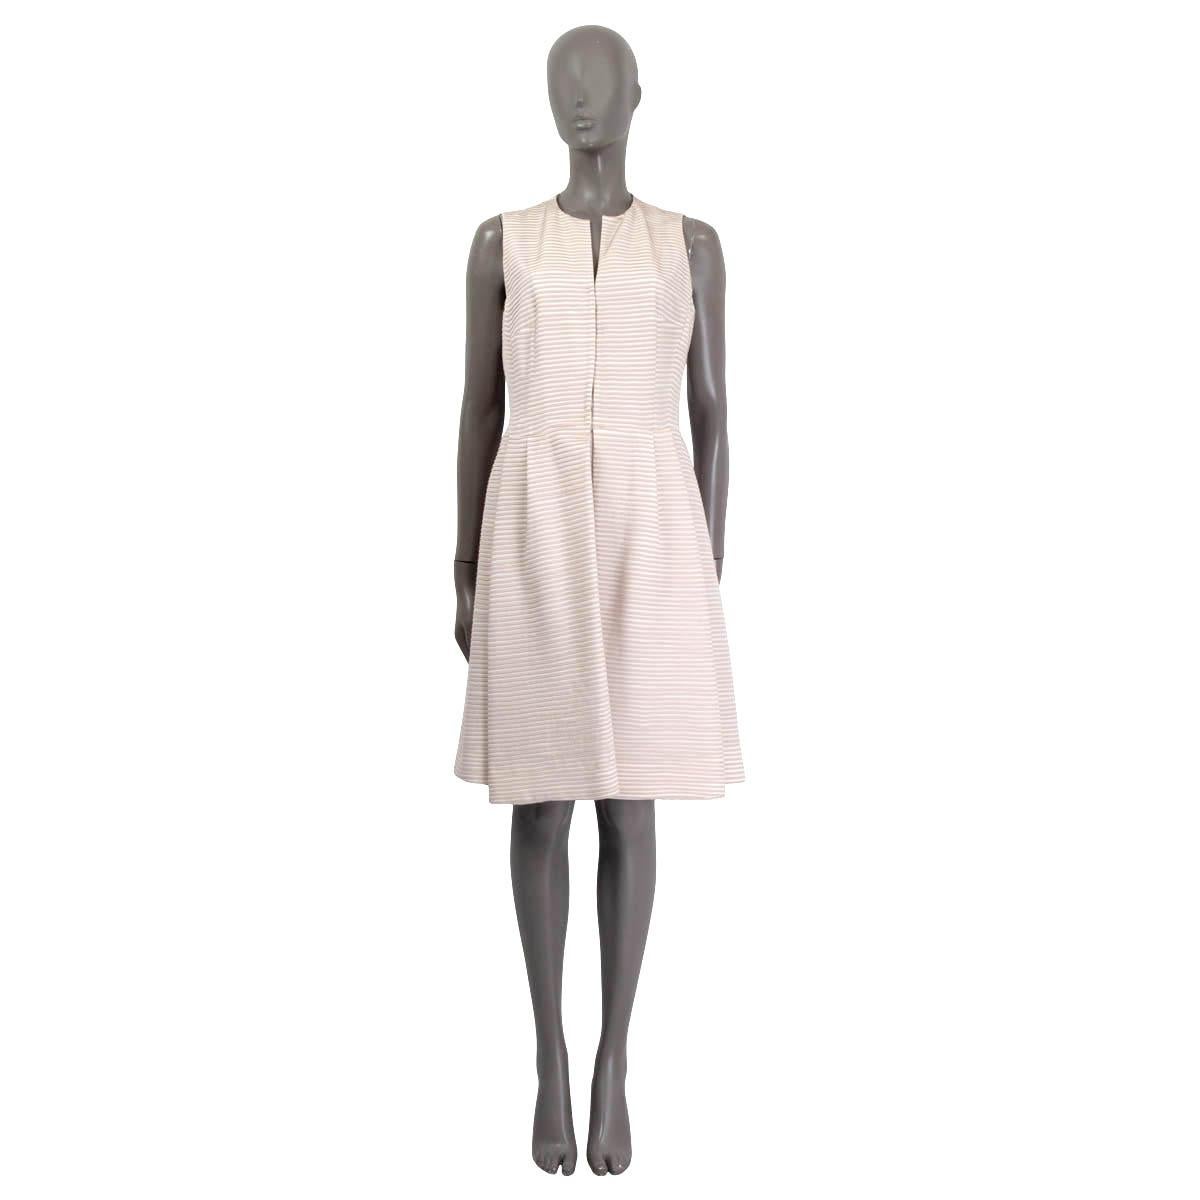 100% authentic Akris sleeveless striped wrap dress in white and dusty rose silk (100%). Features a v-neck and a slit on the front. Opens with concealed buttons and hooks on the front. Lined in white viscose (100%). Has been worn and is in excellent